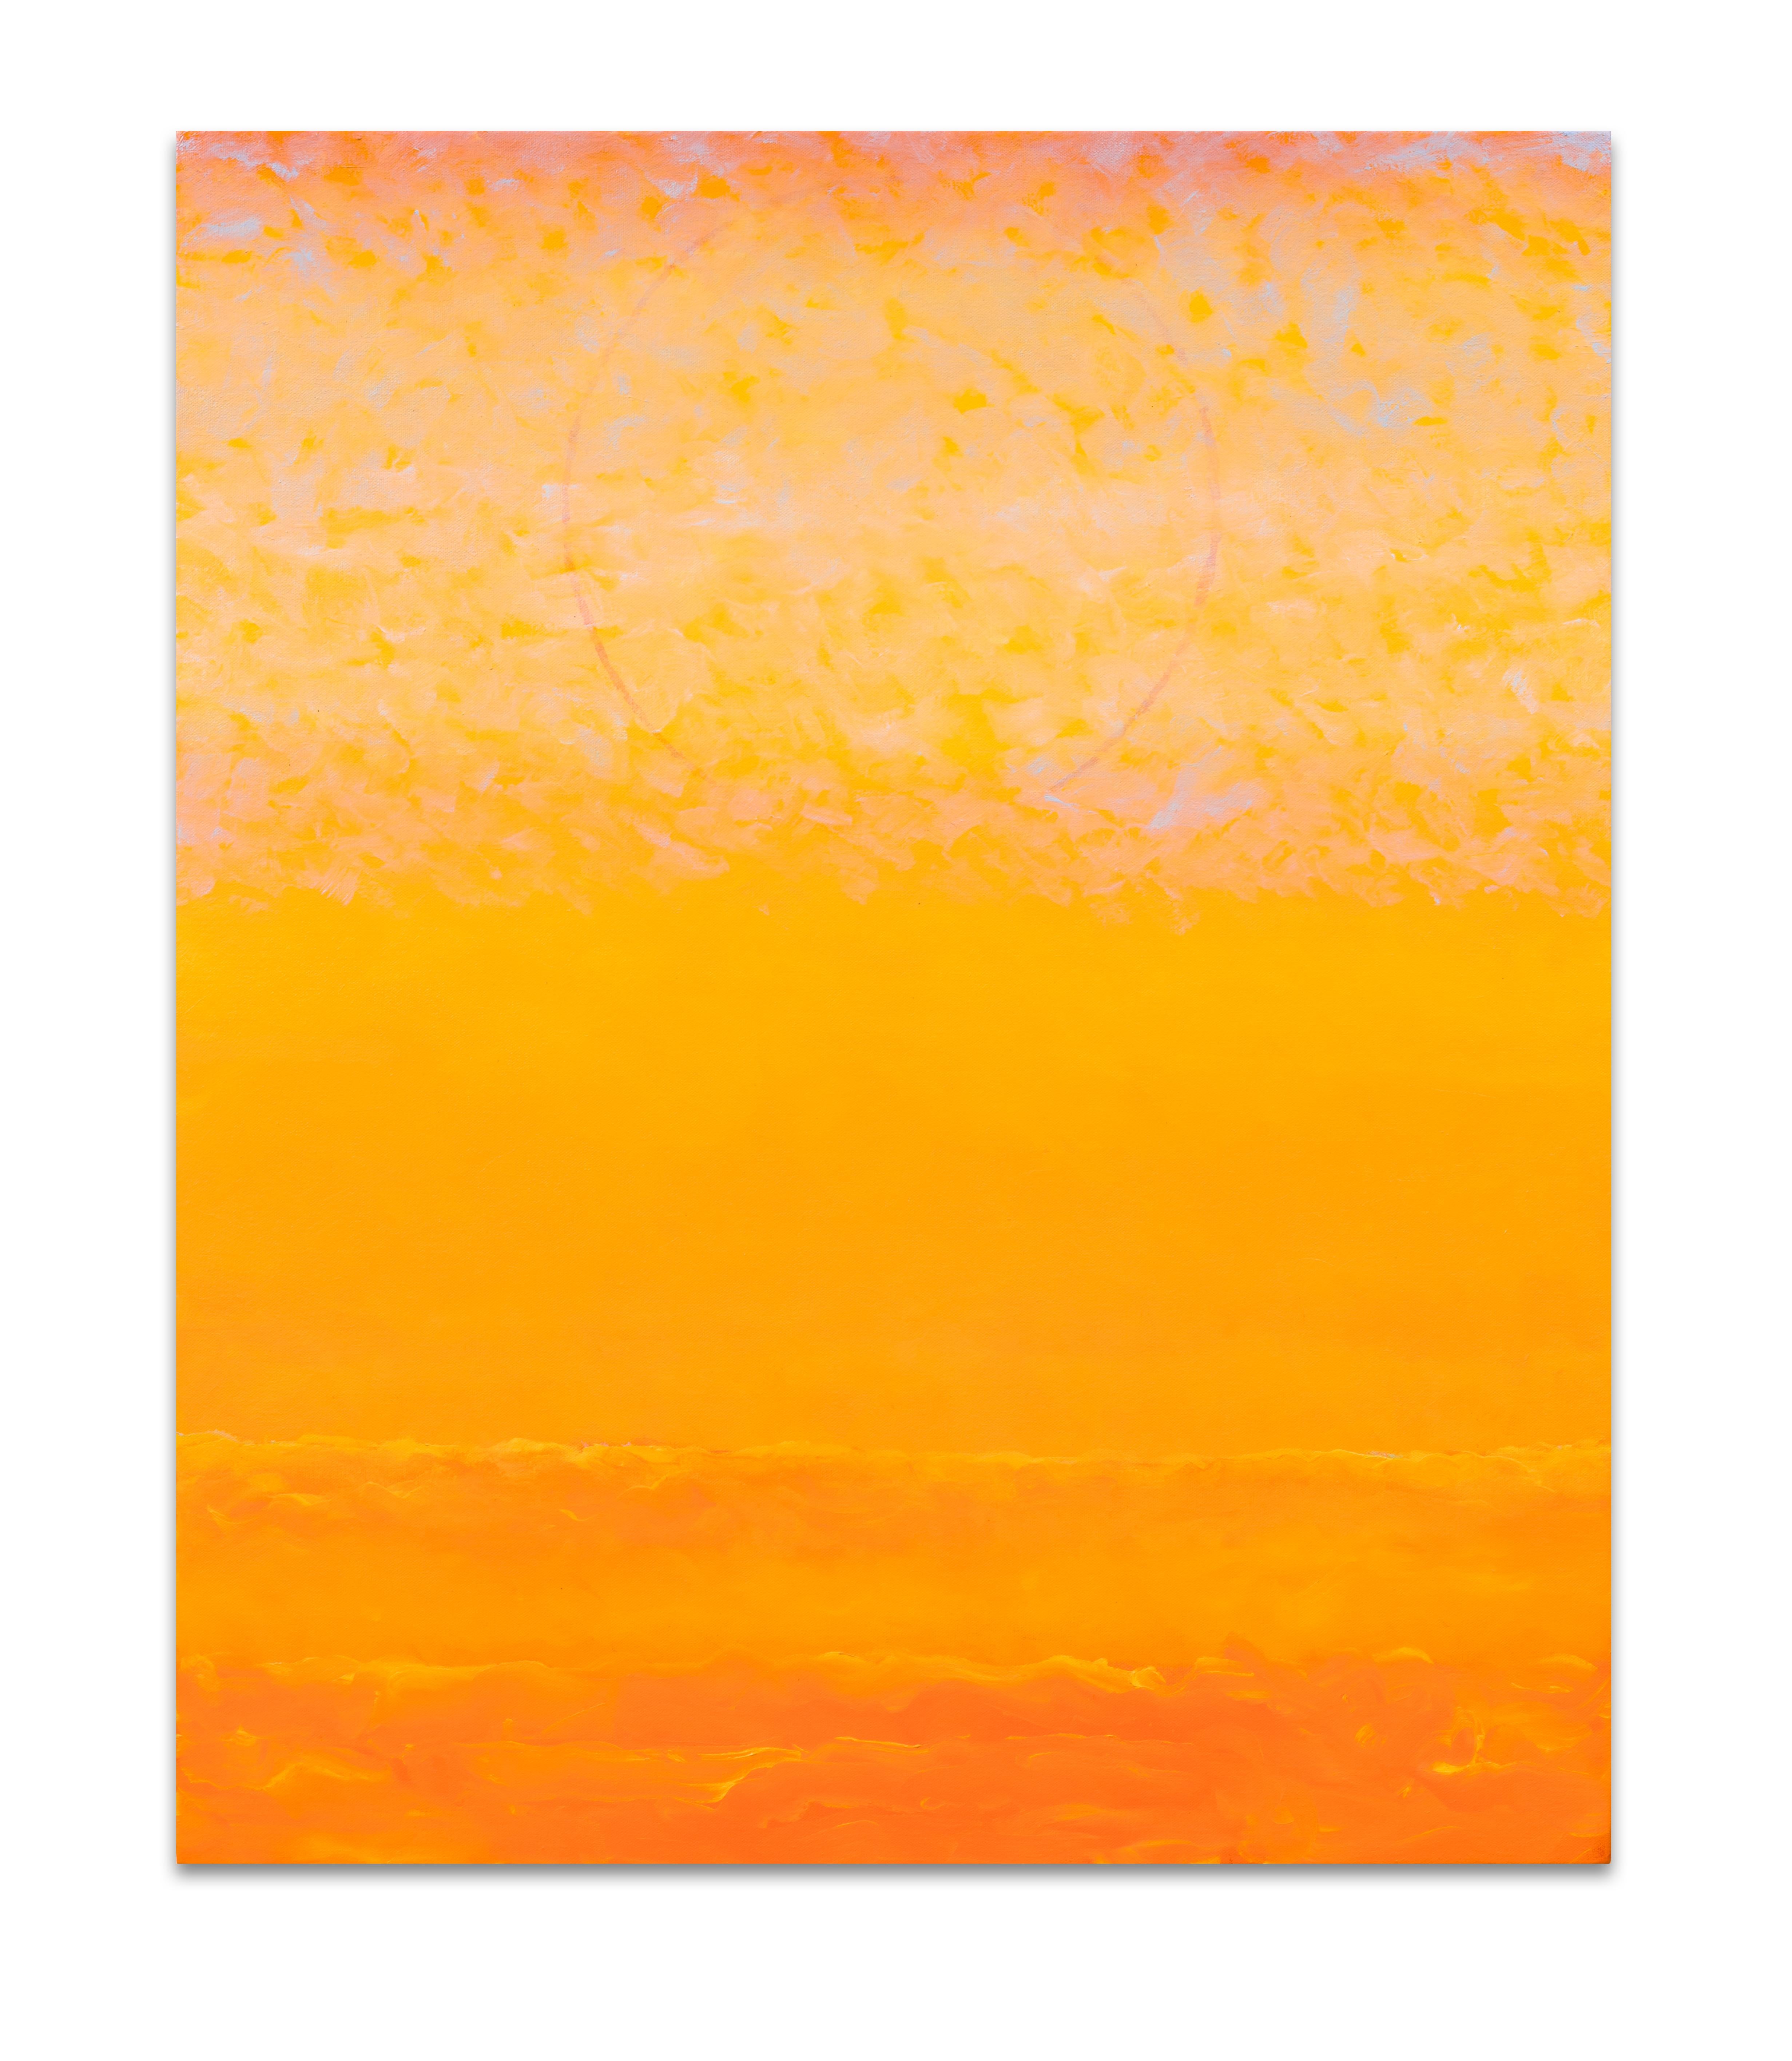 Saffron yellow rectangular abstract oil painting on canvas